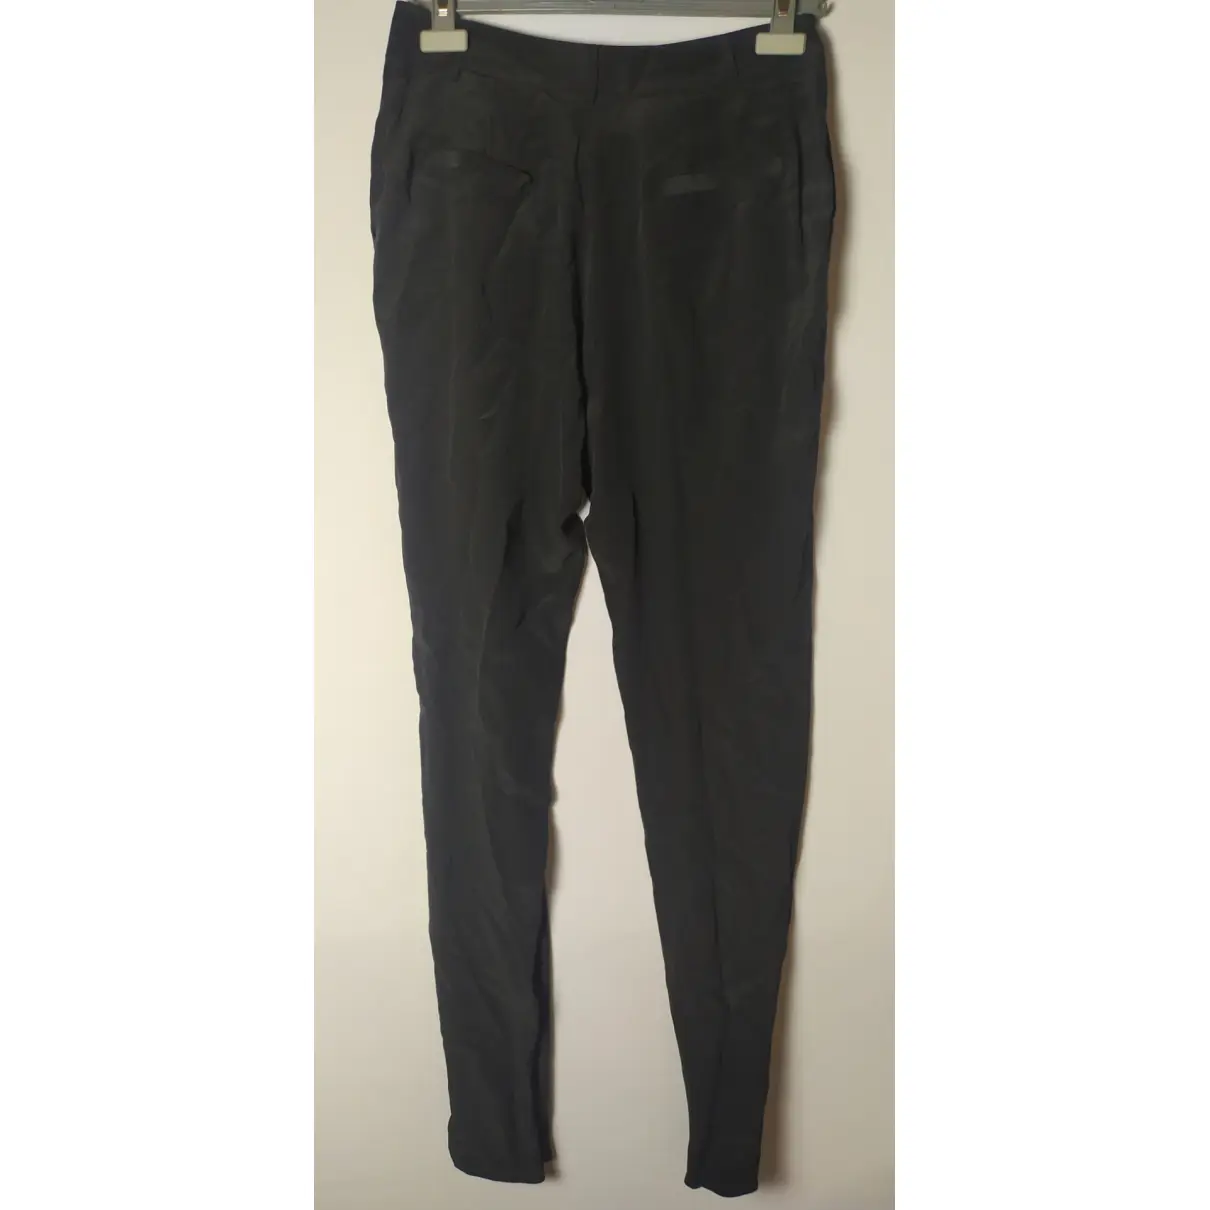 Buy Marco Bologna Silk trousers online